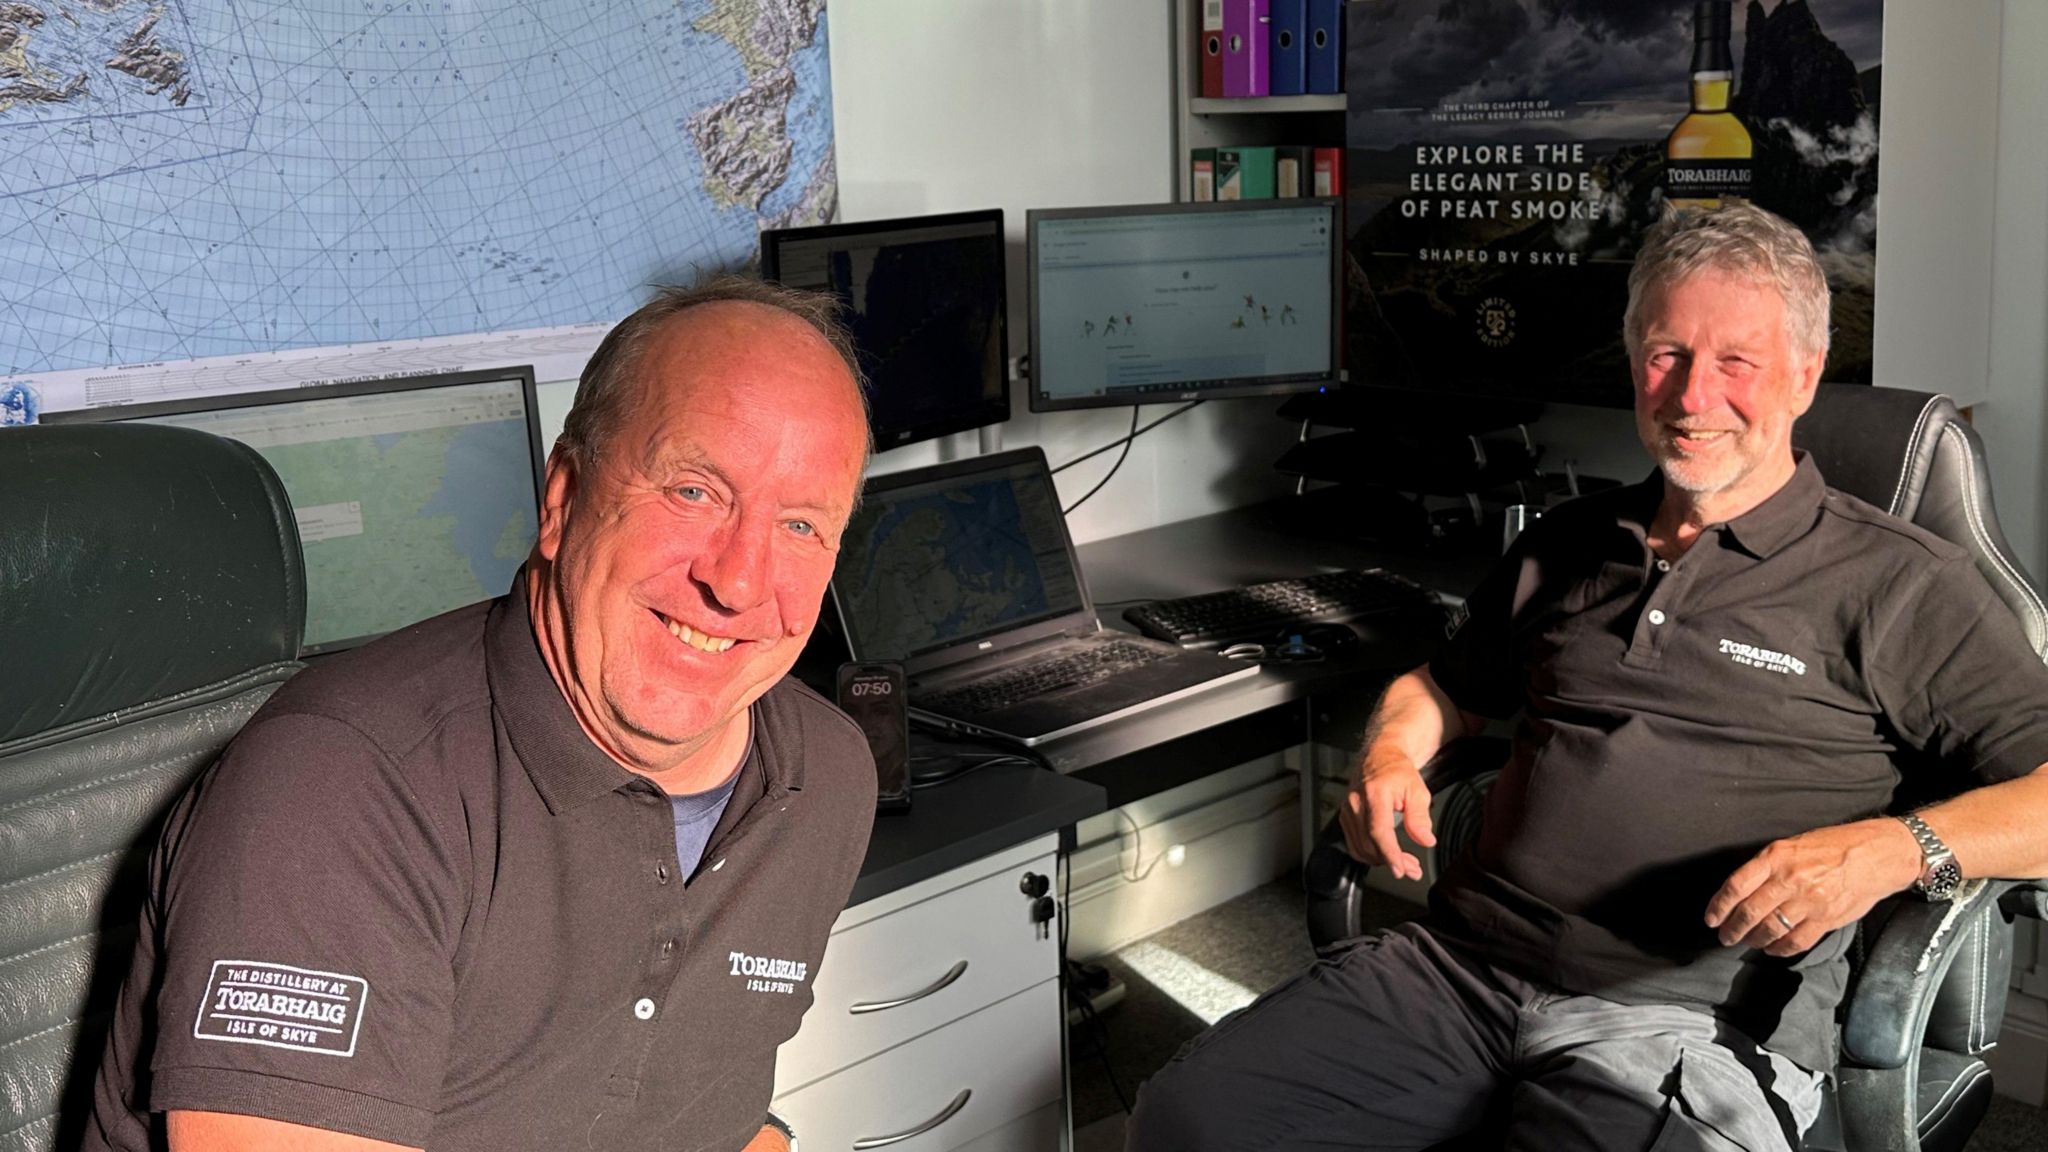 Two men sat in the flight control office next to computers and maps